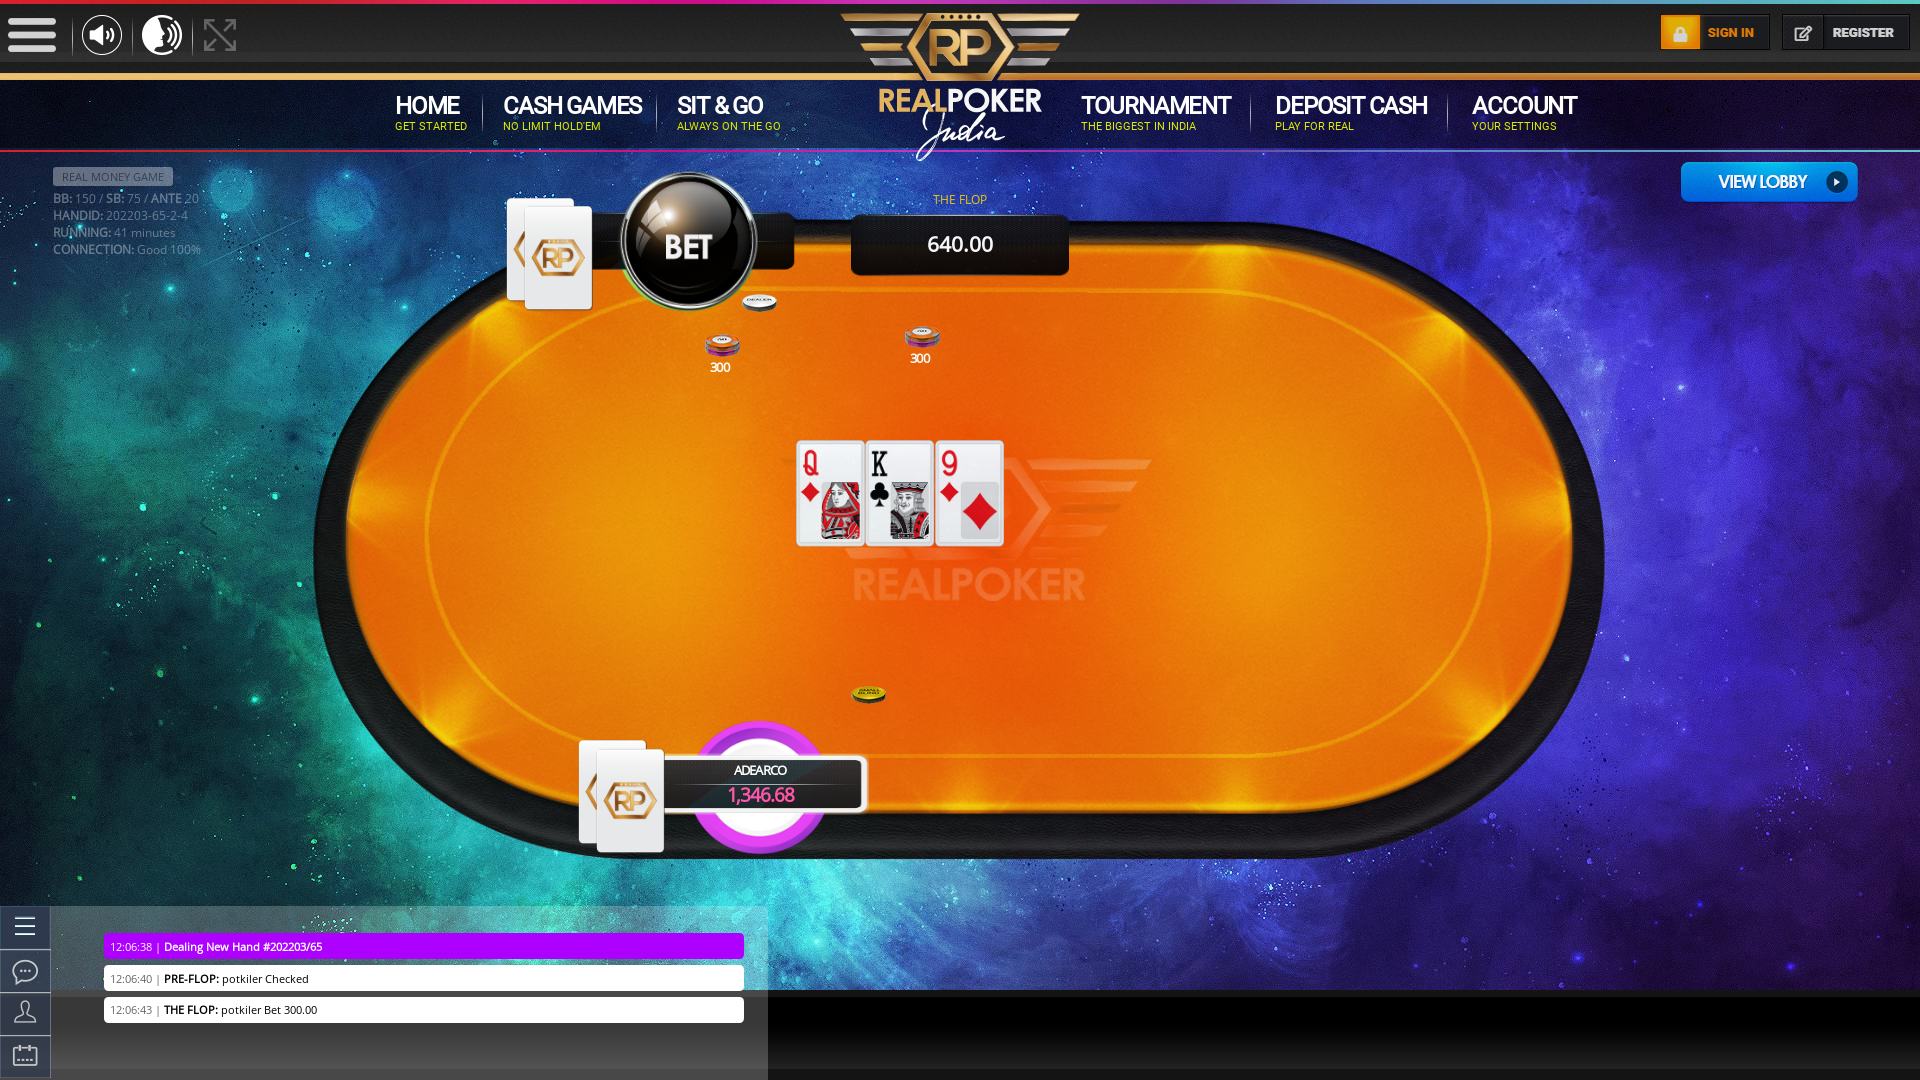 BTM Layout, Bangalore 10 player poker in the 41st minute